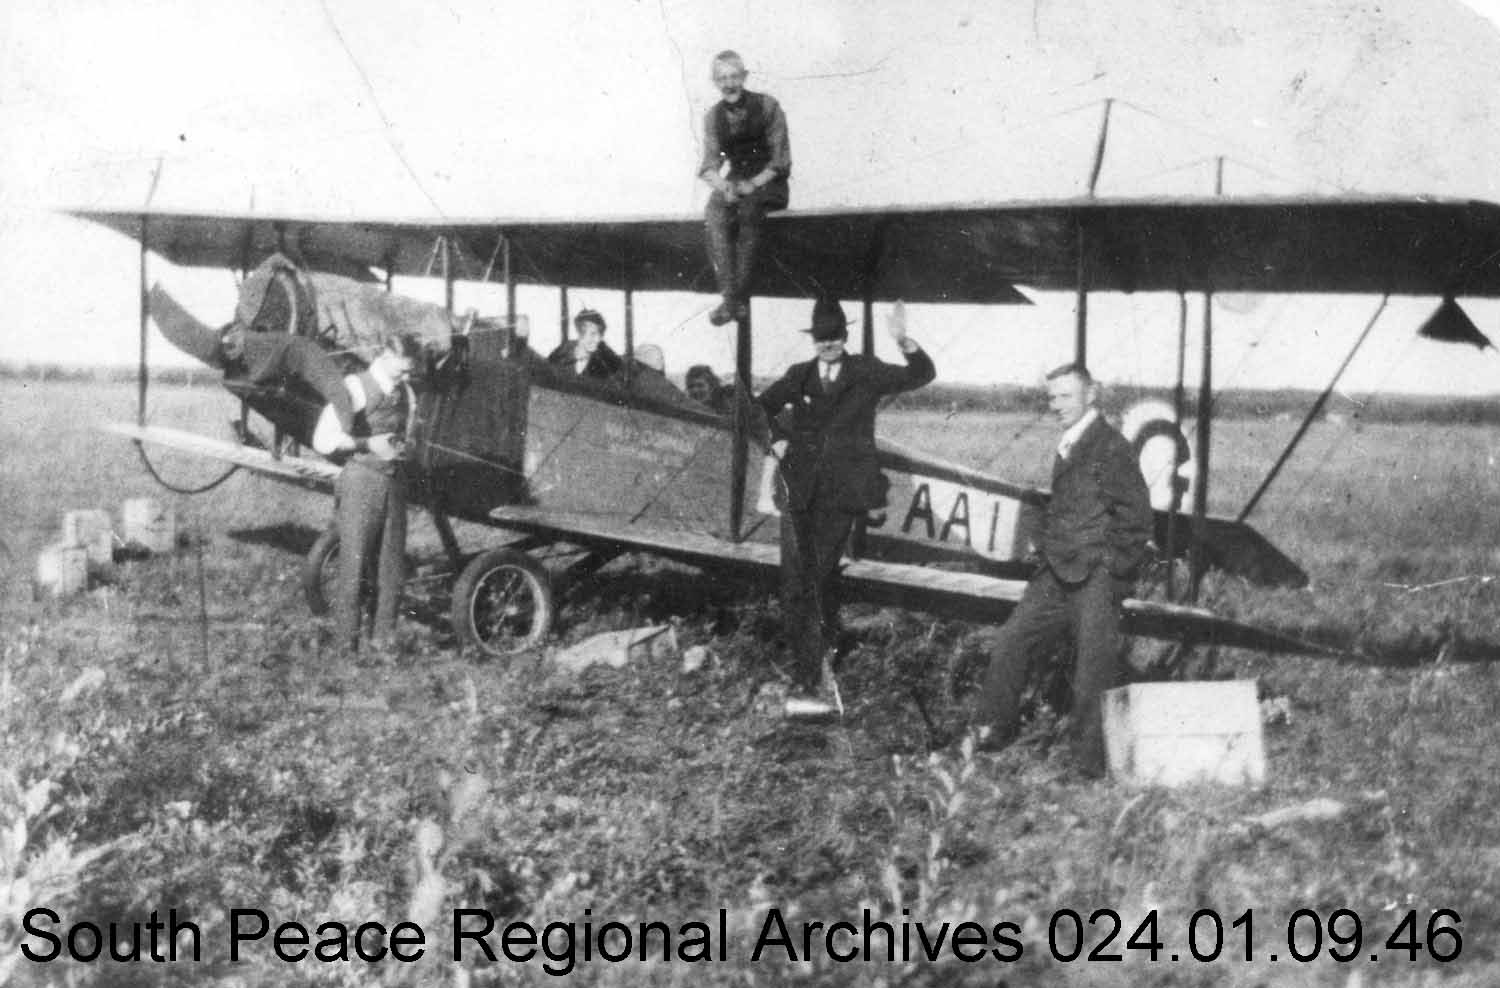 Wop May landed the first airplane in the Grande Prairie area in 1920.